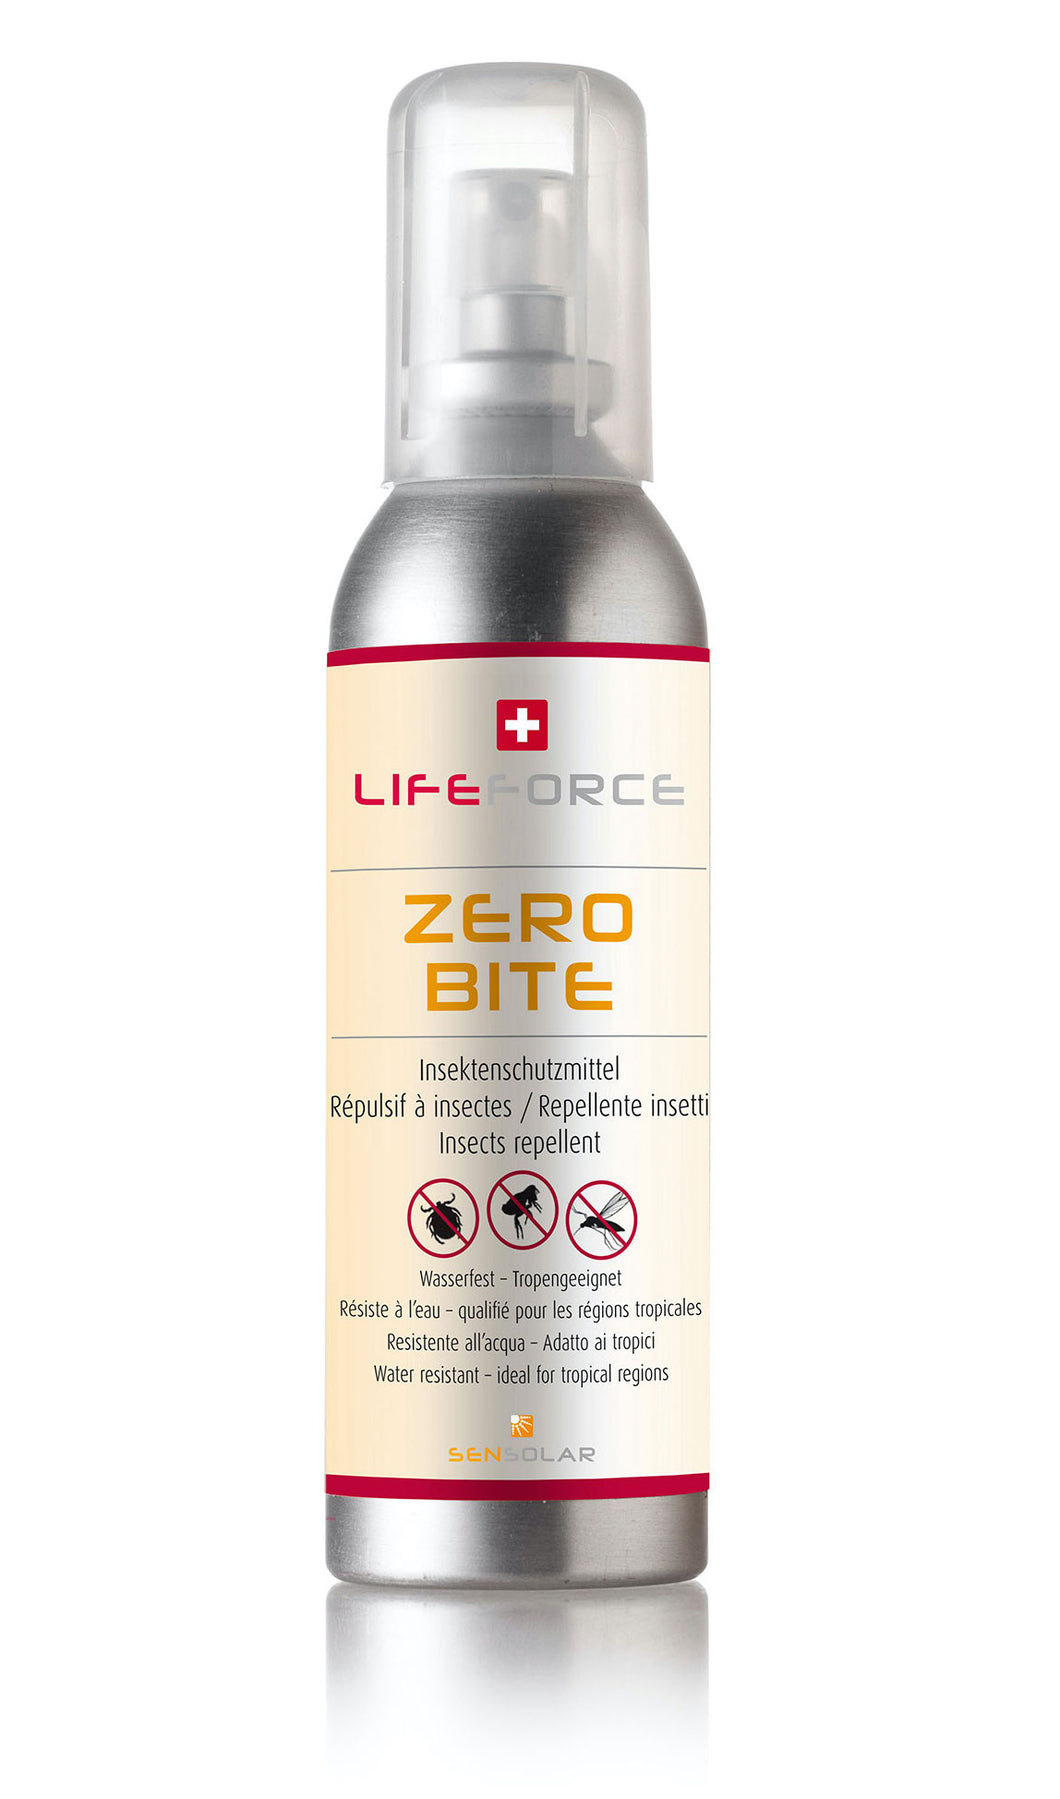 sensolar zerobite 33degrees singapore tropical insect repellent lifeforce swiss made mosquito spray lotion